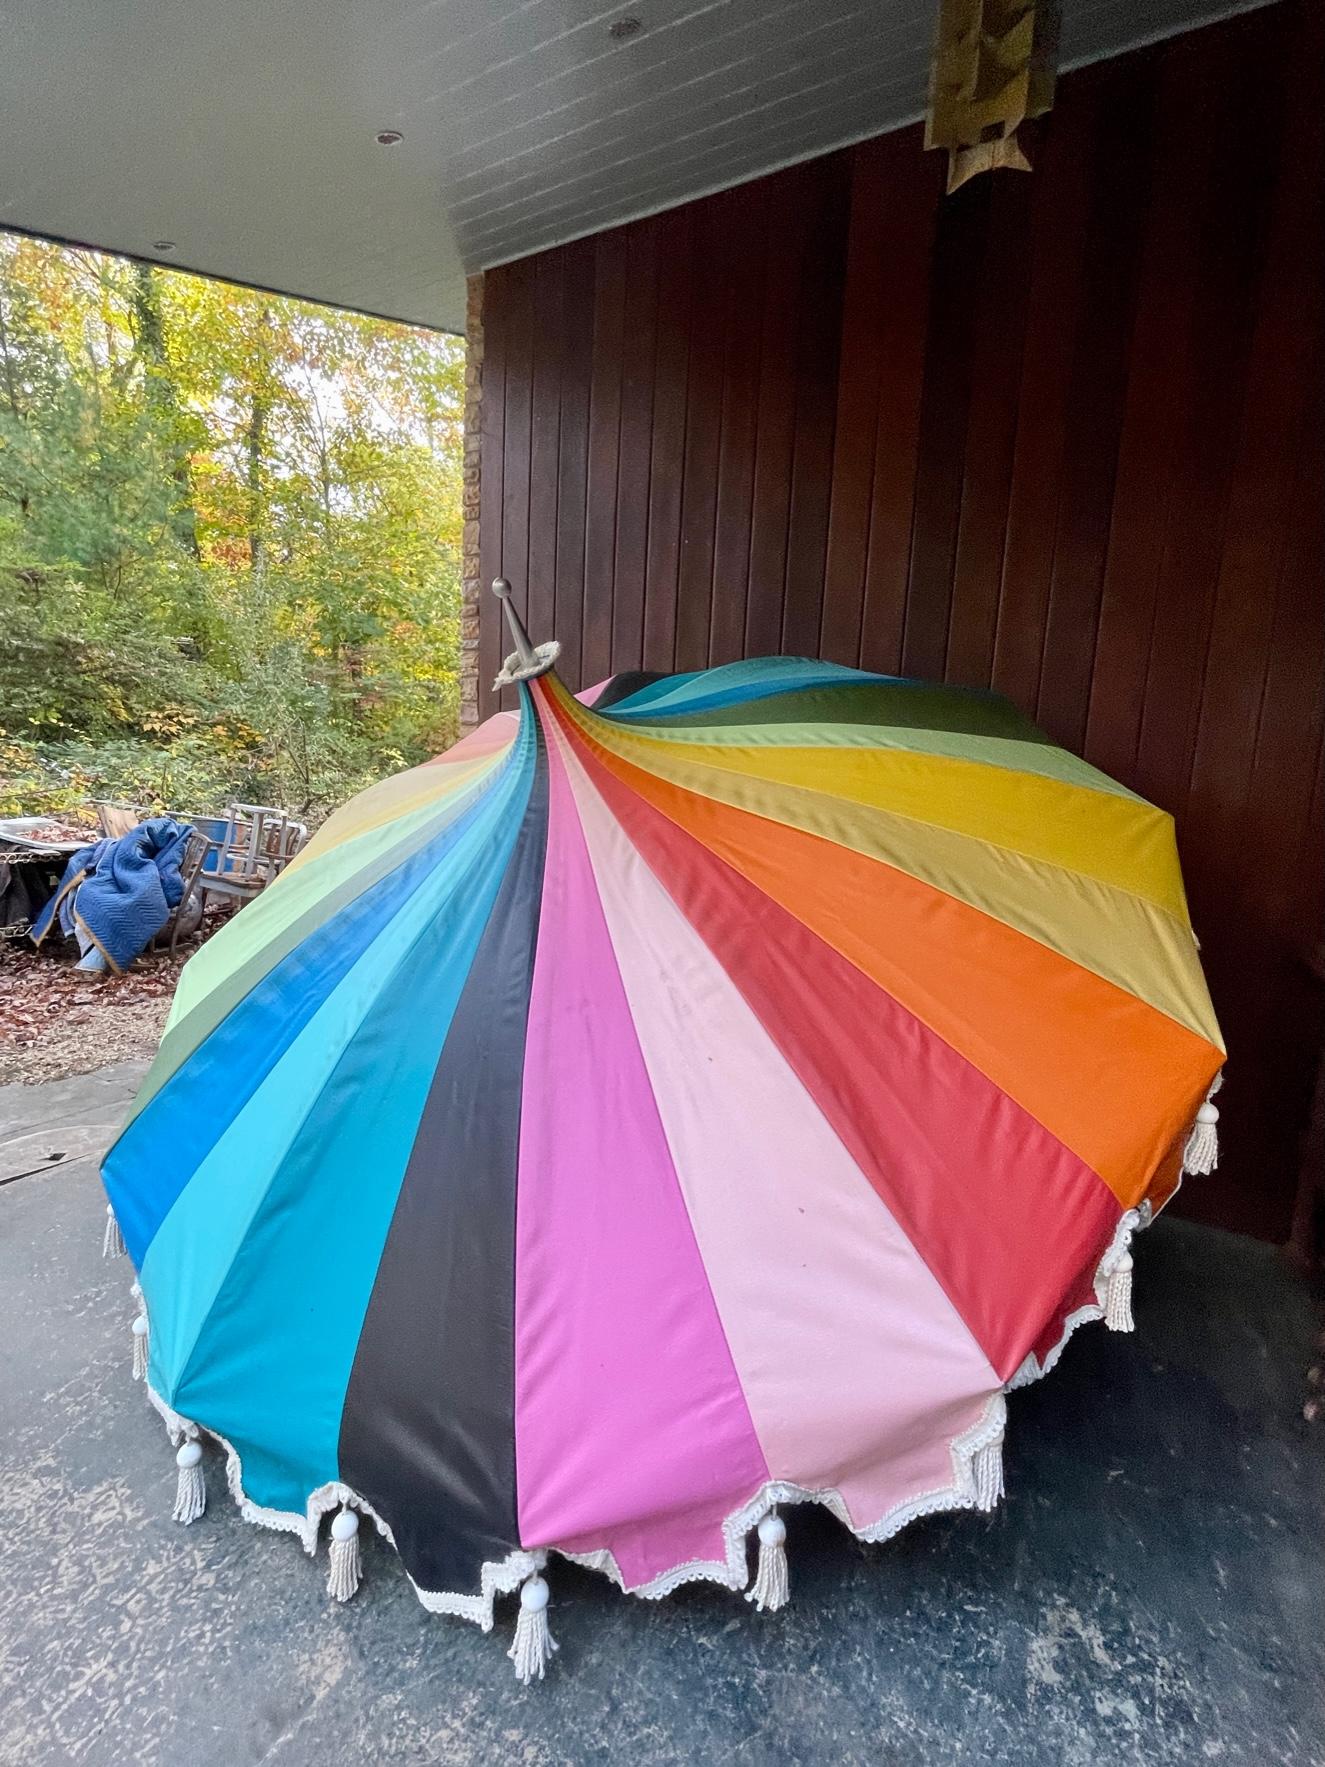 No base or extension poles are included.

This is a vintage 1960's Sunmaster umbrella, made in Costa Mesa, California.   Massive 8 foot diameter. The colors are so amazing, with a big top Circus Style.  The edges have tassels and fringe along the